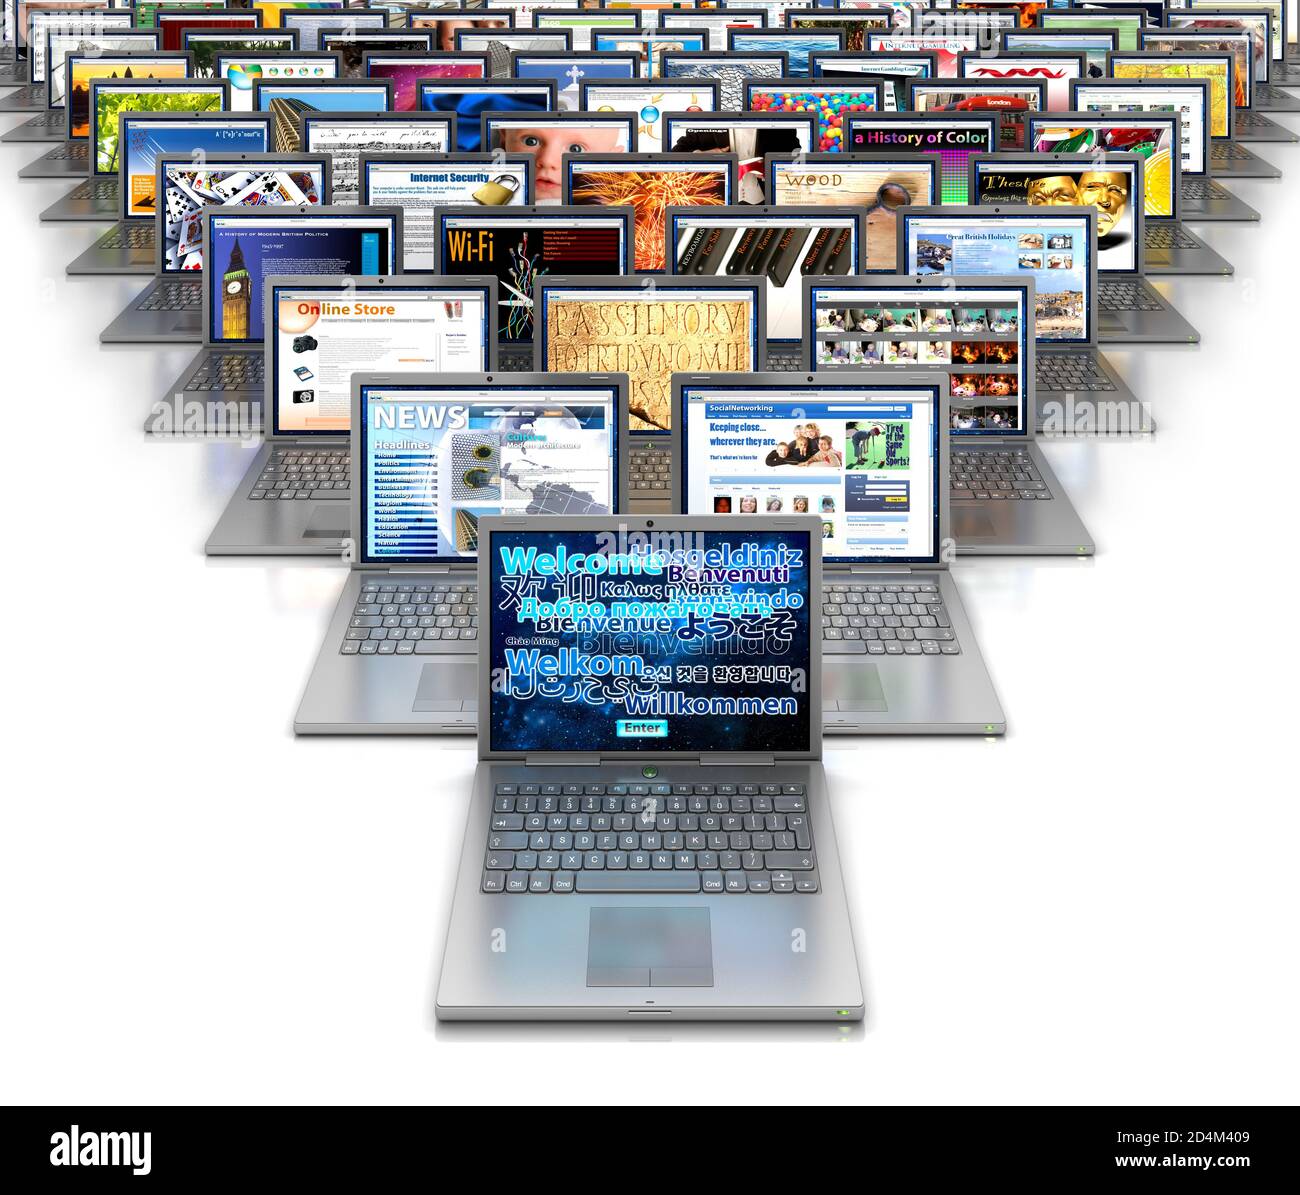 Lap top computer screens, social media, networking, white background, isolated, Laptop, internet, e commerce, e mail, website, interconnected Stock Photo